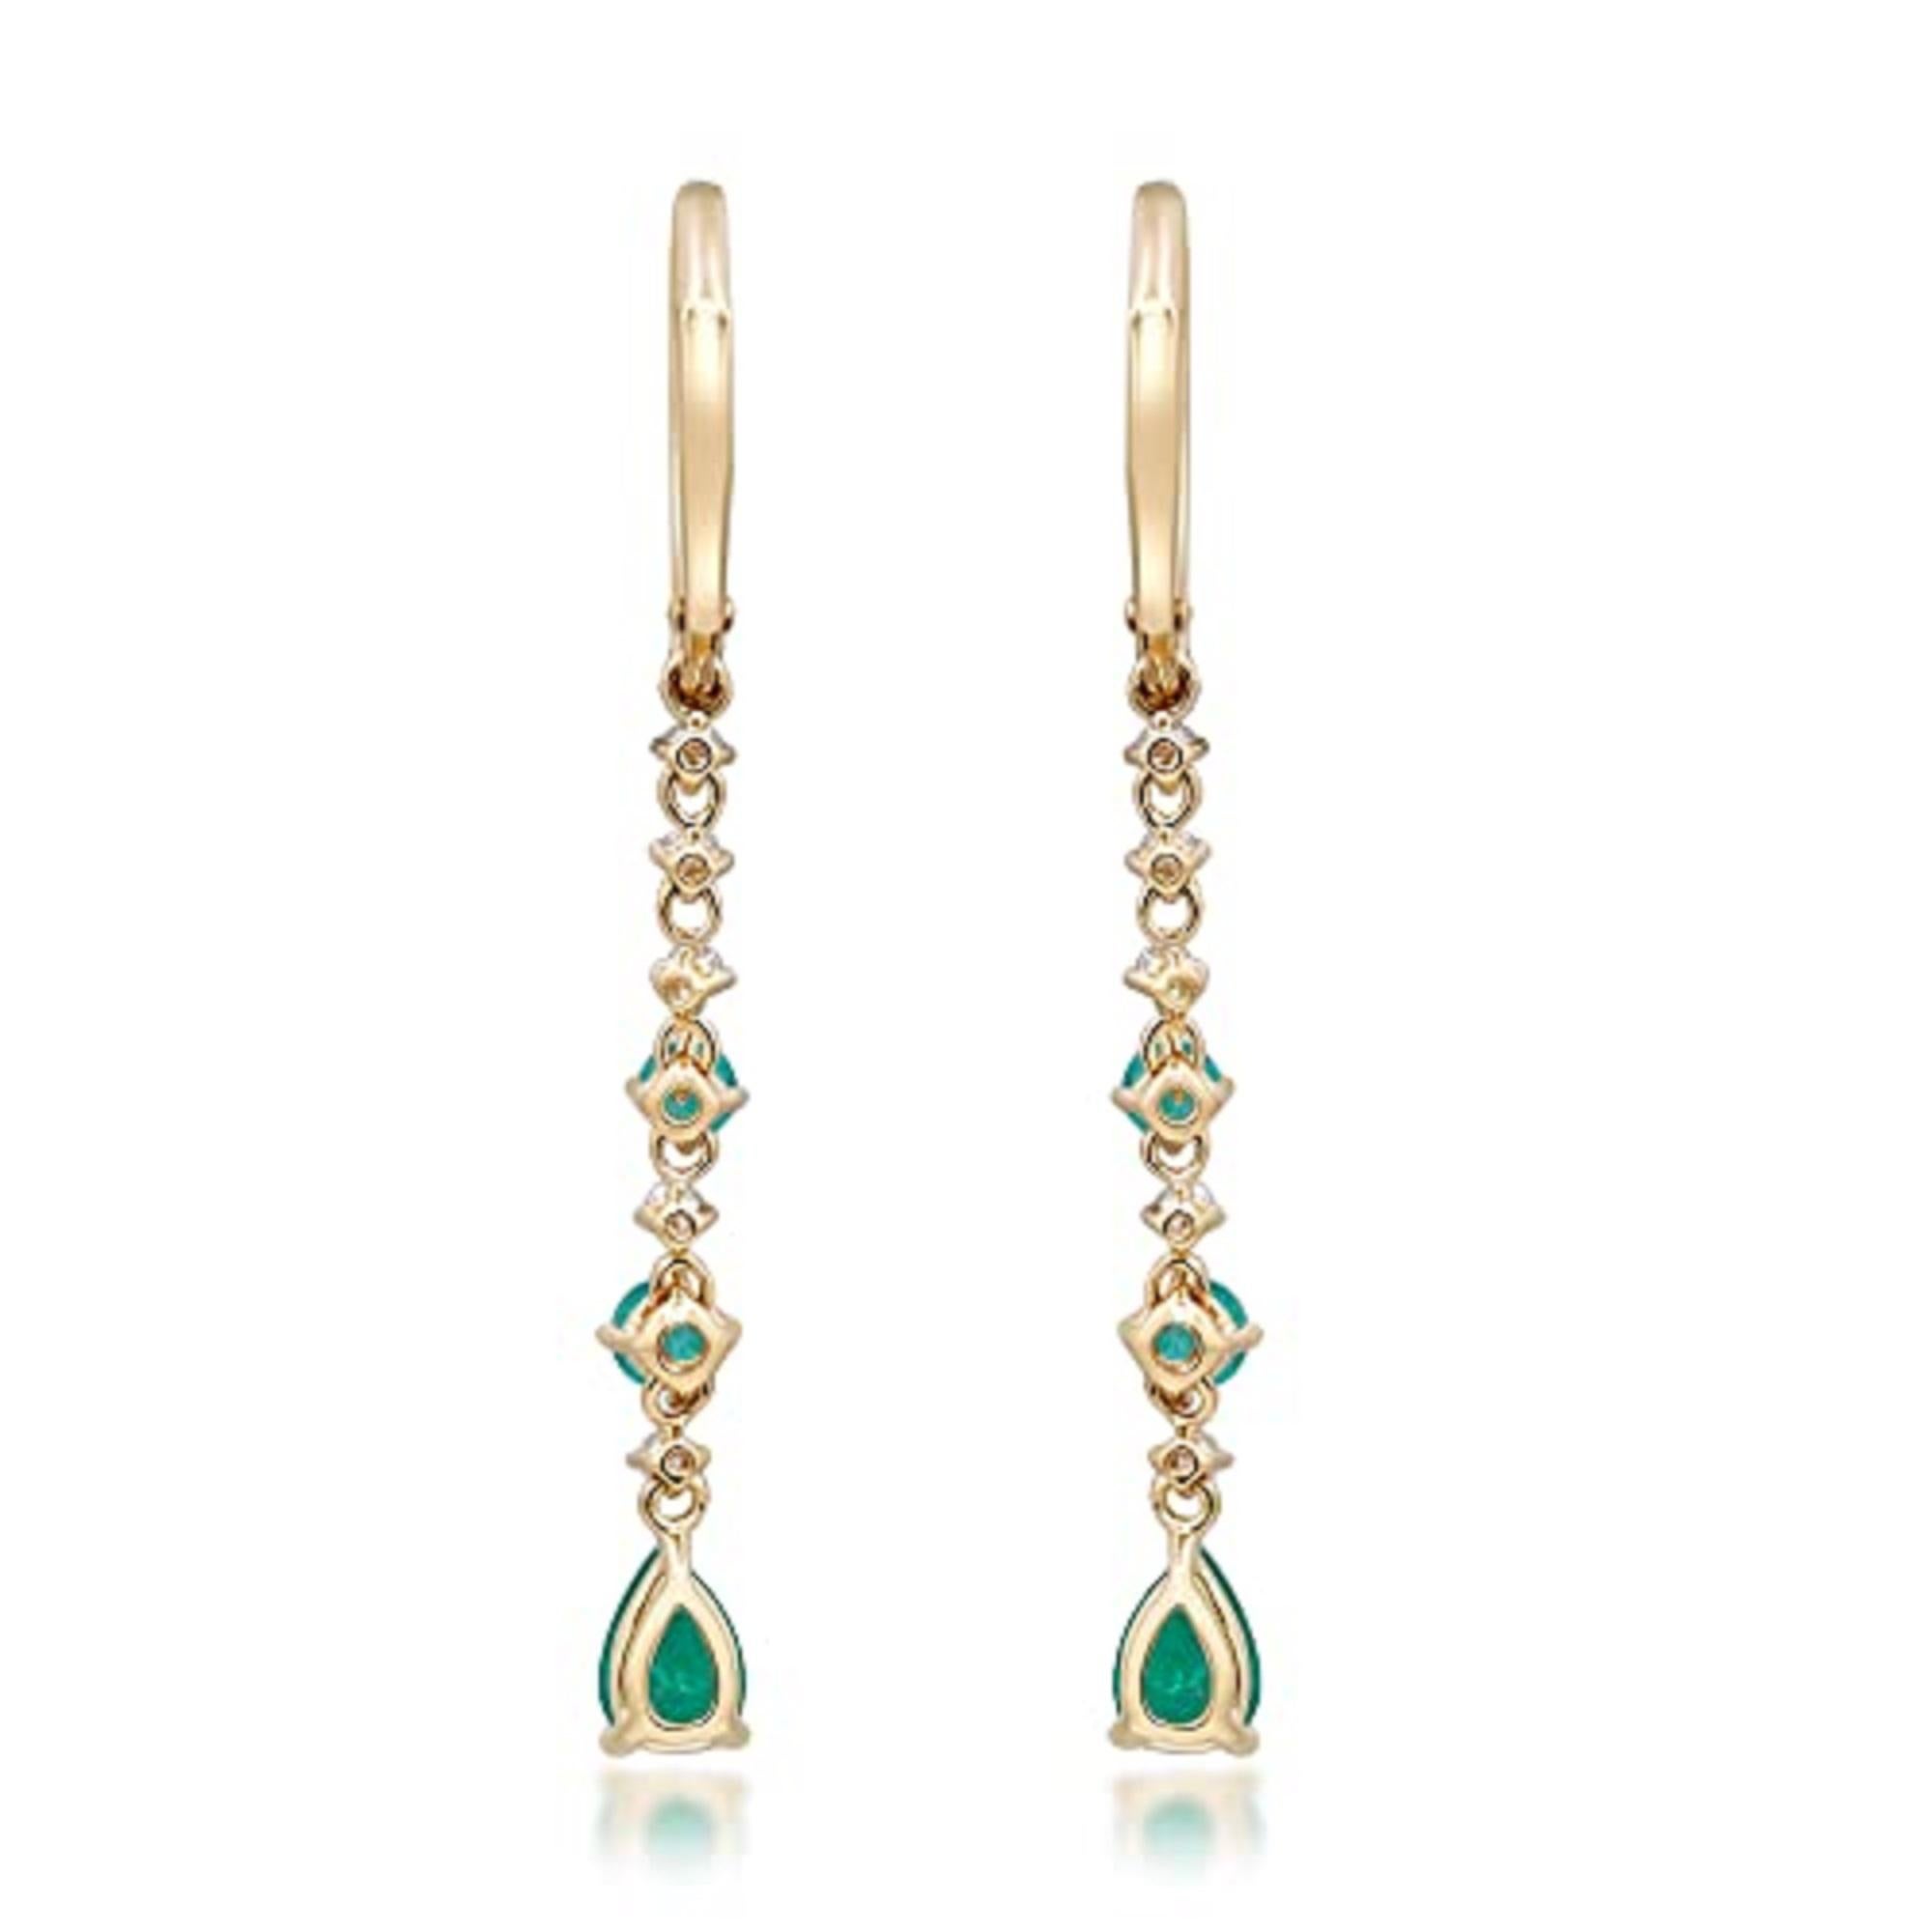 Pear Cut 1.0 carat Pear, Round-Cut Emerald With Diamond Accents 14K Yellow Gold Earring. For Sale